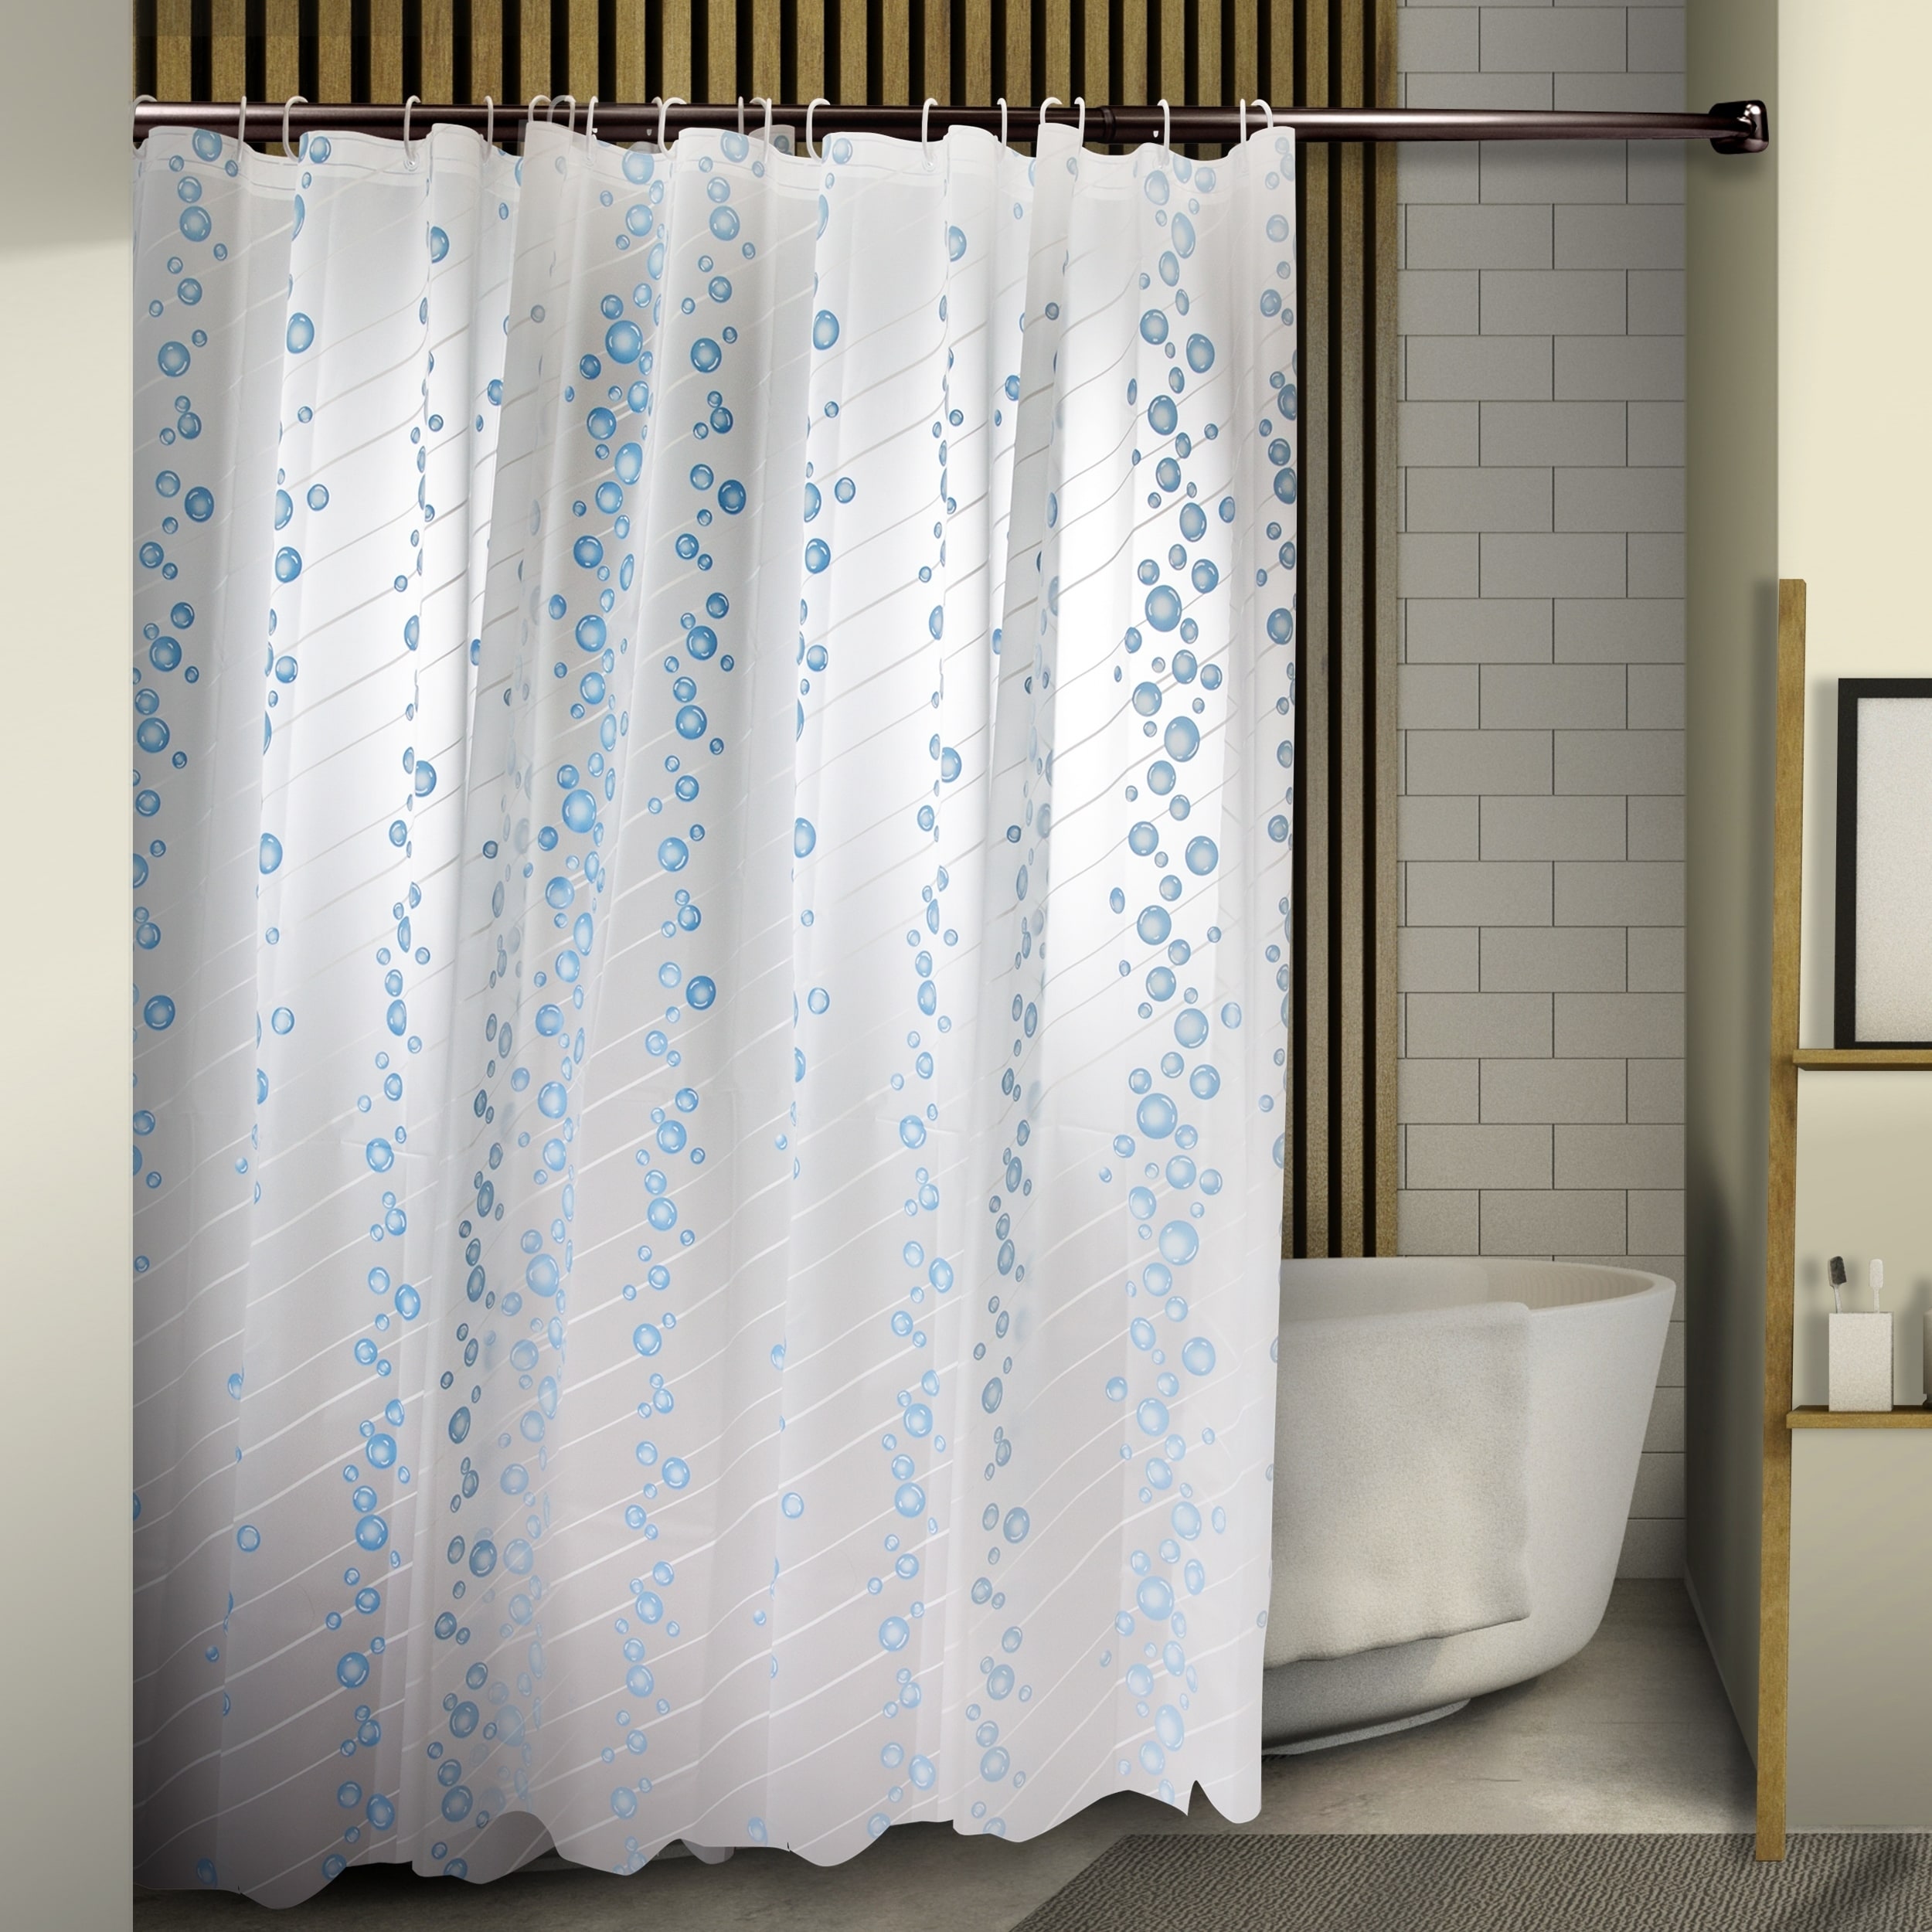 InStyleDesign Bubble Shower Curtain 71